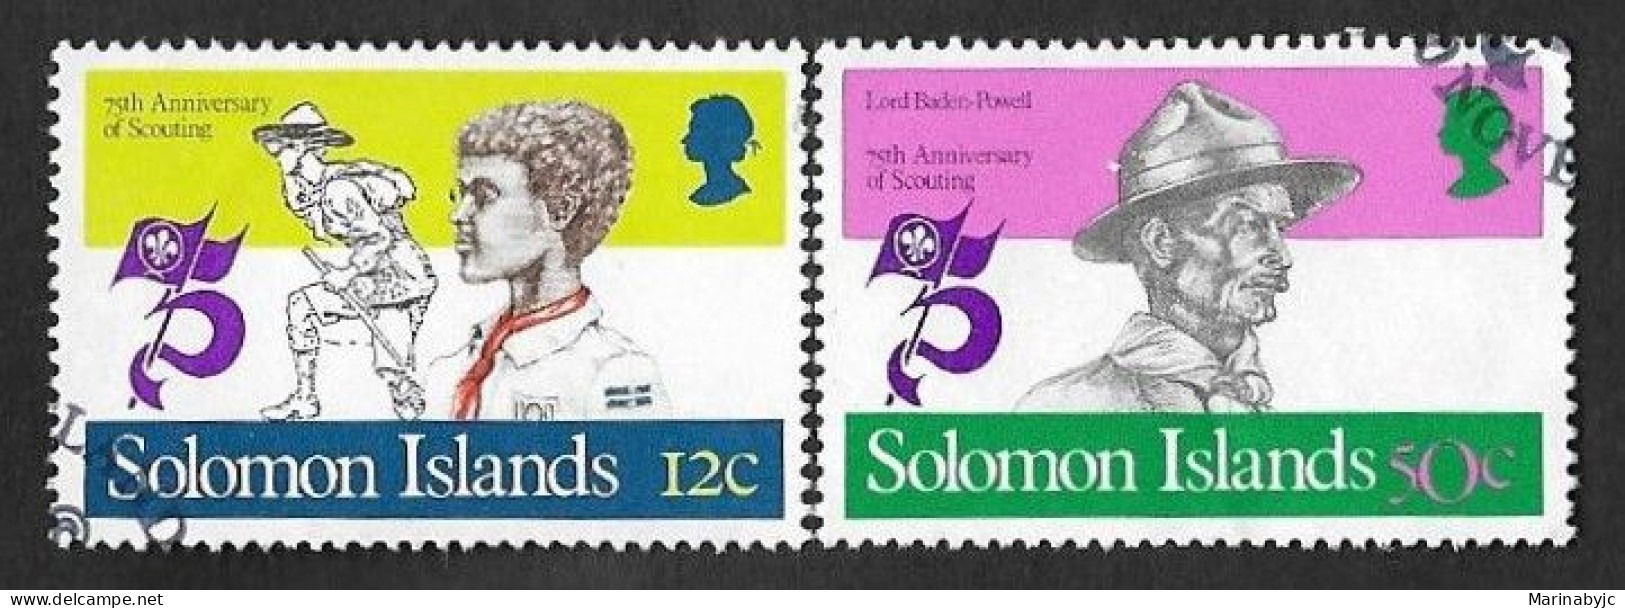 SD)1982 SOLOMON ISLANDS SHORT SERIES 75TH ANNIVERSARY OF SCOUTING, BOY IN BRIGADE AND BADEN POWELL, 2 USED STAMPS - Solomon Islands (1978-...)